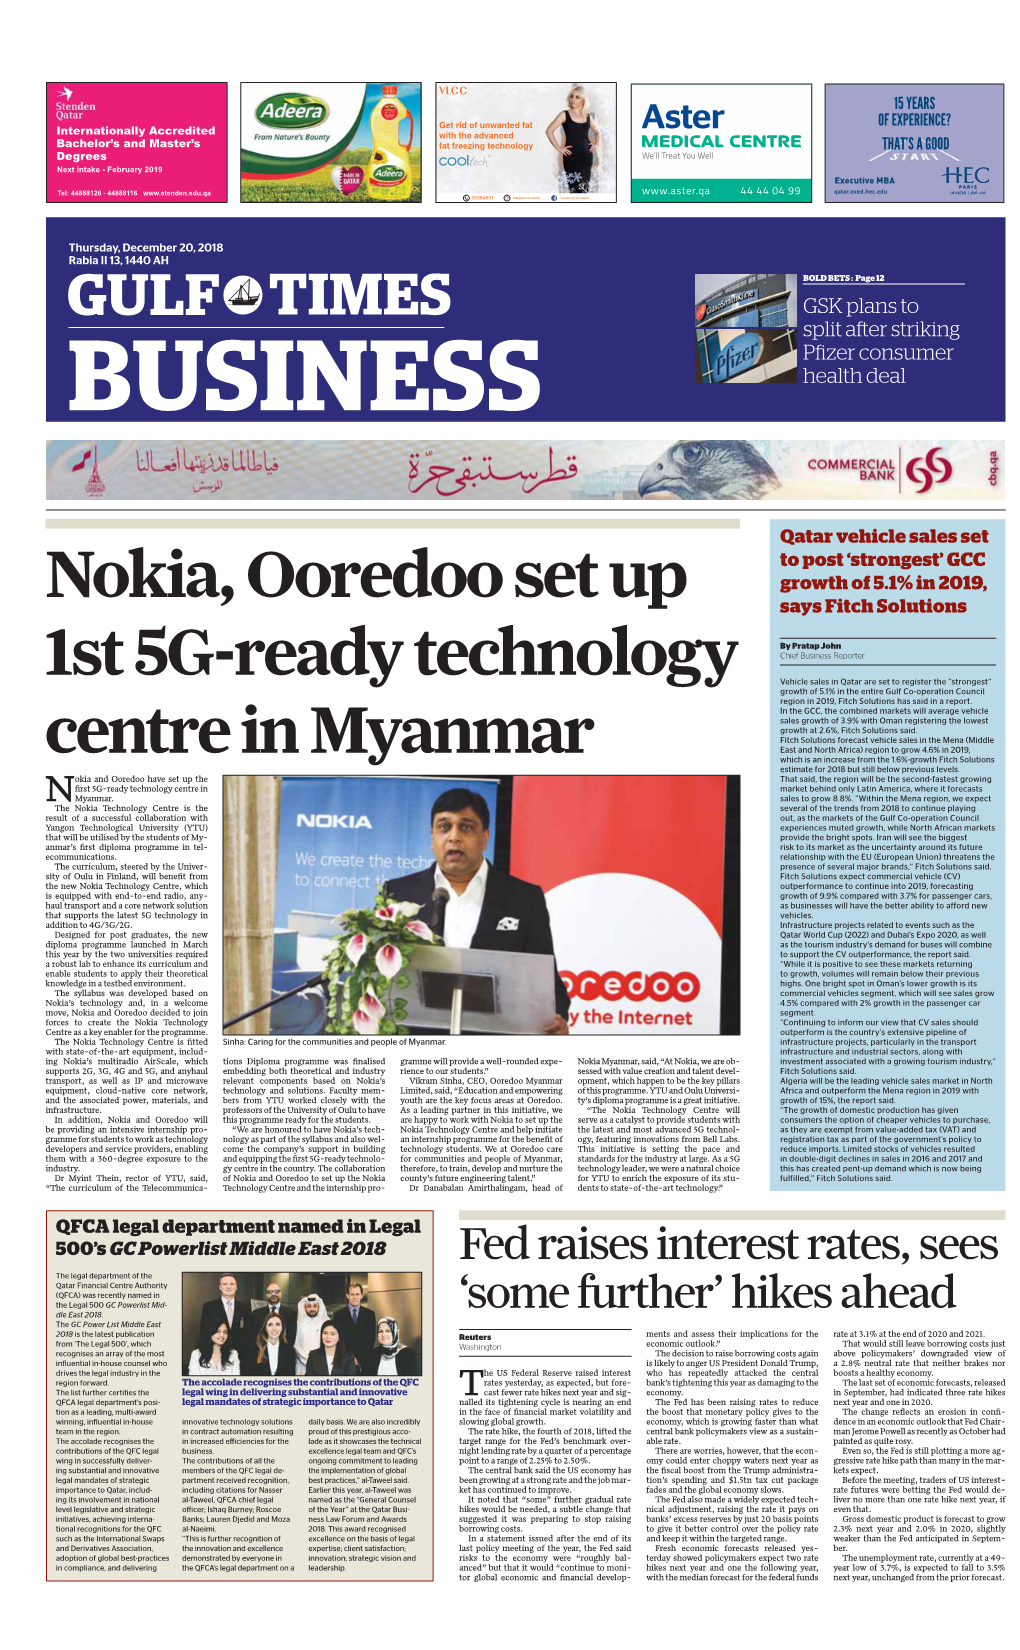 Nokia, Ooredoo Set up 1St 5G-Ready Technology Centre in Myanmar